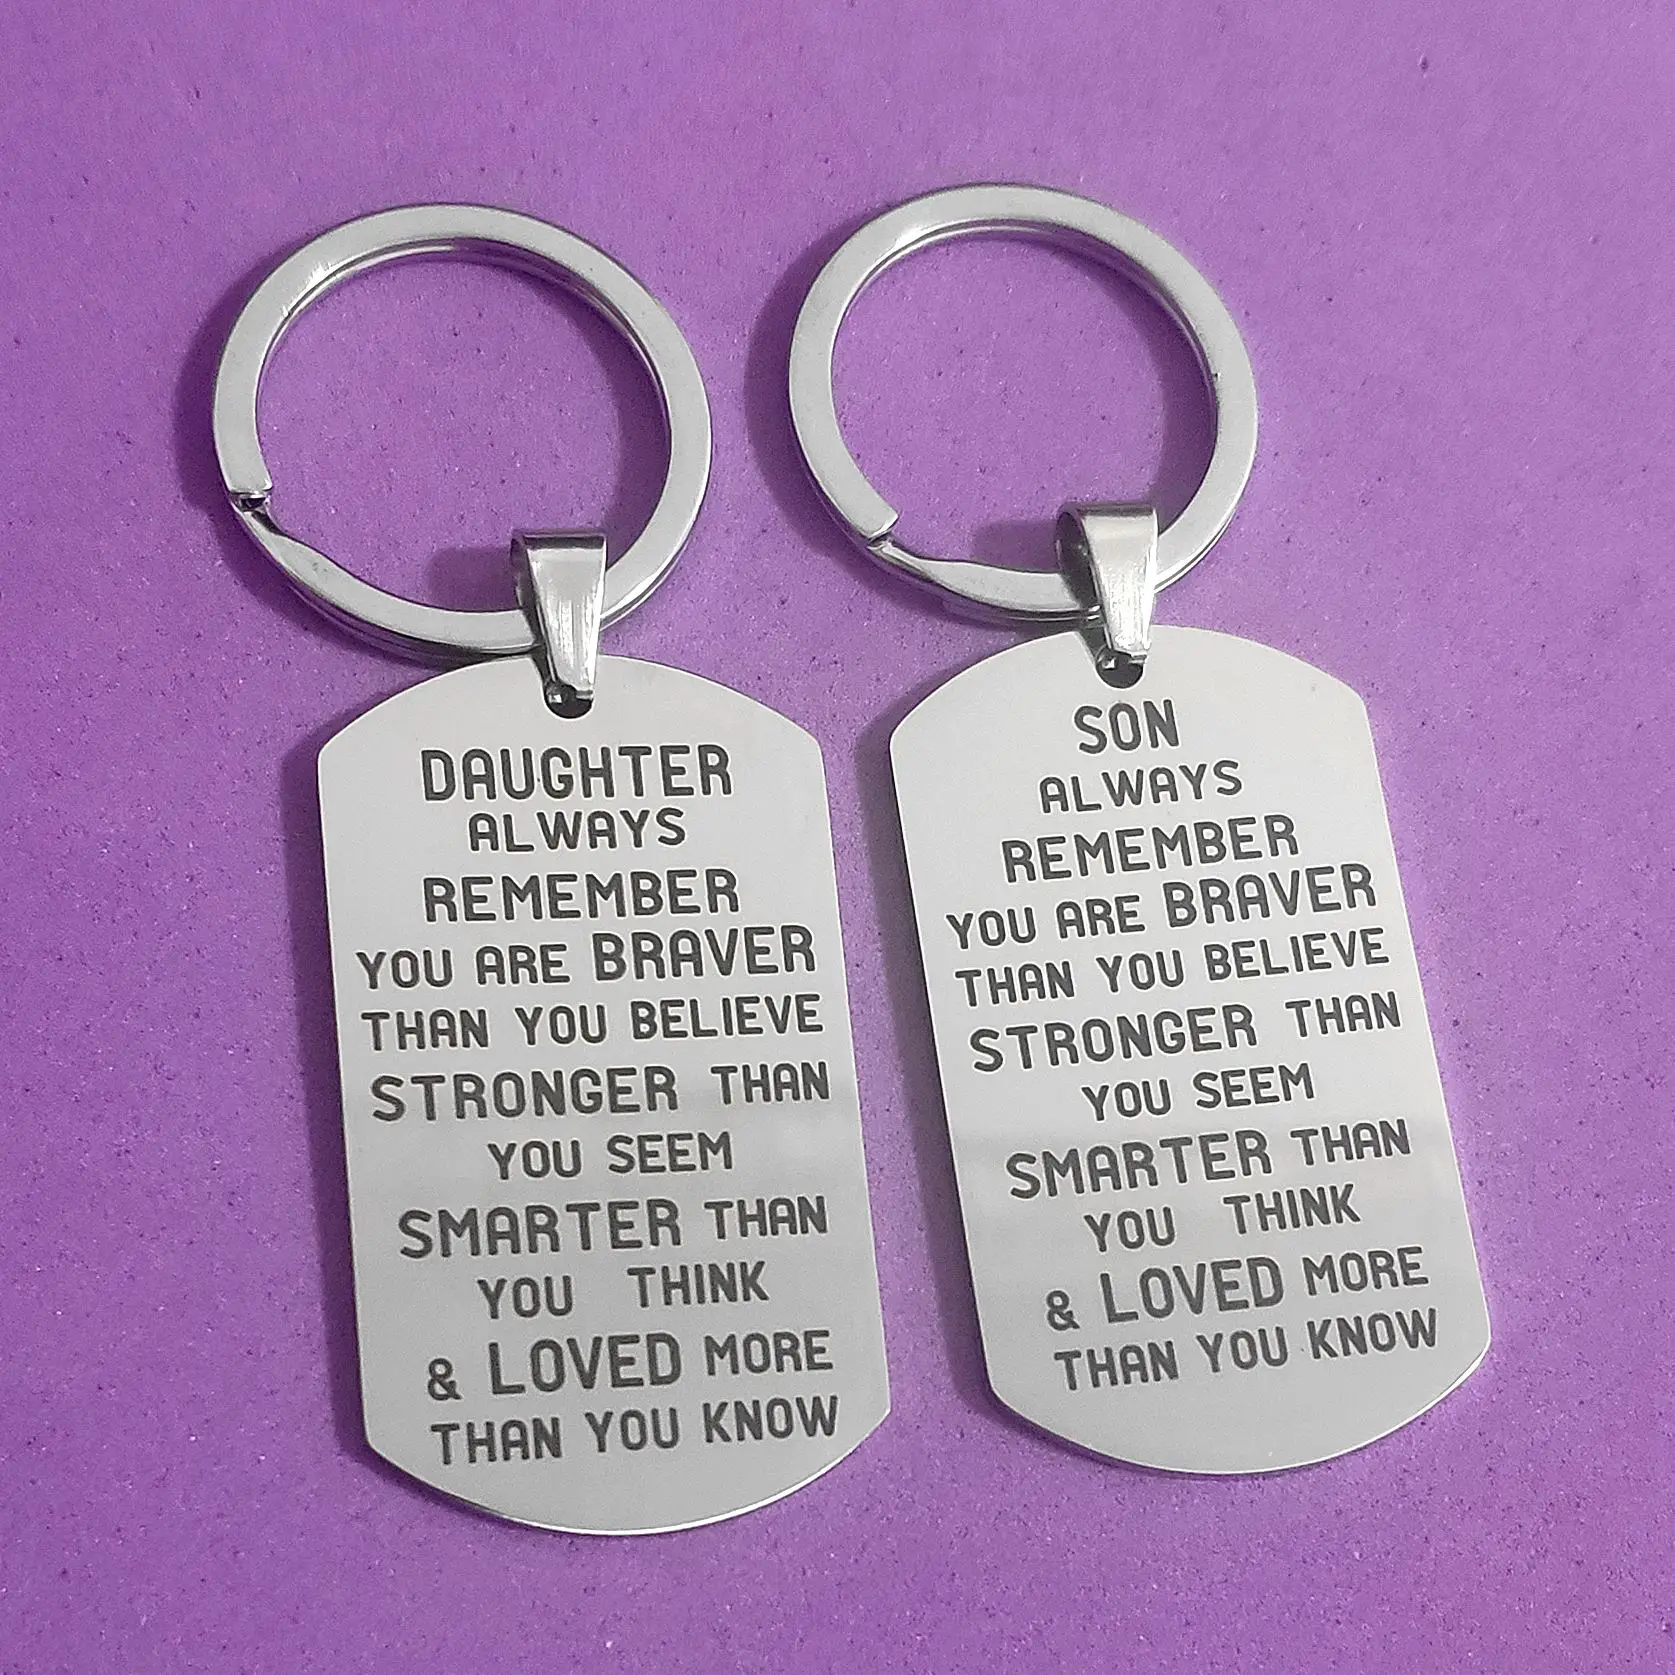 

Keyring Graduation Keychain for Car Keys Stainless Steel Creative Kid Gifts Birthday SON DAUGHTER Military Tags Carabiner Holder